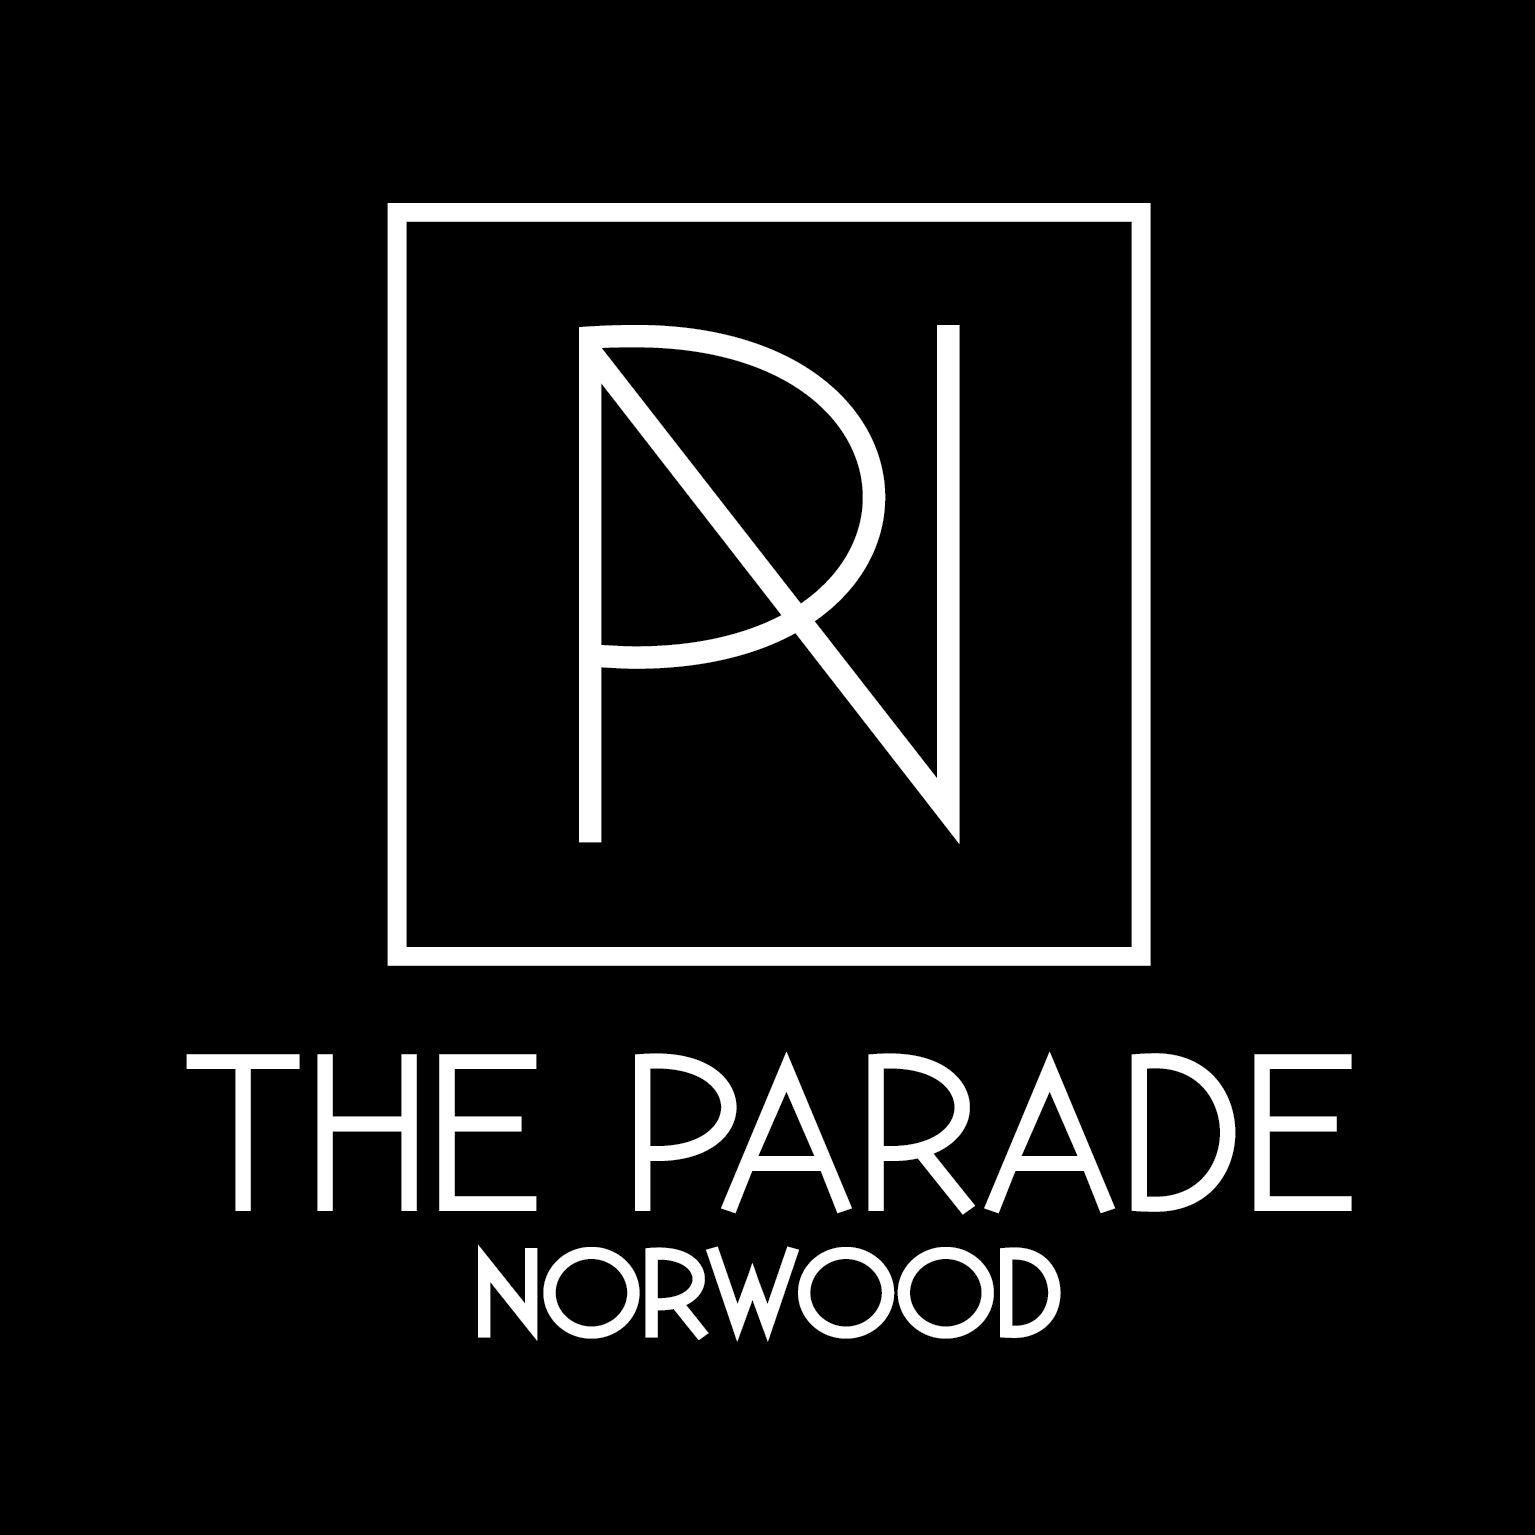 Logo for The Parade, Norwood